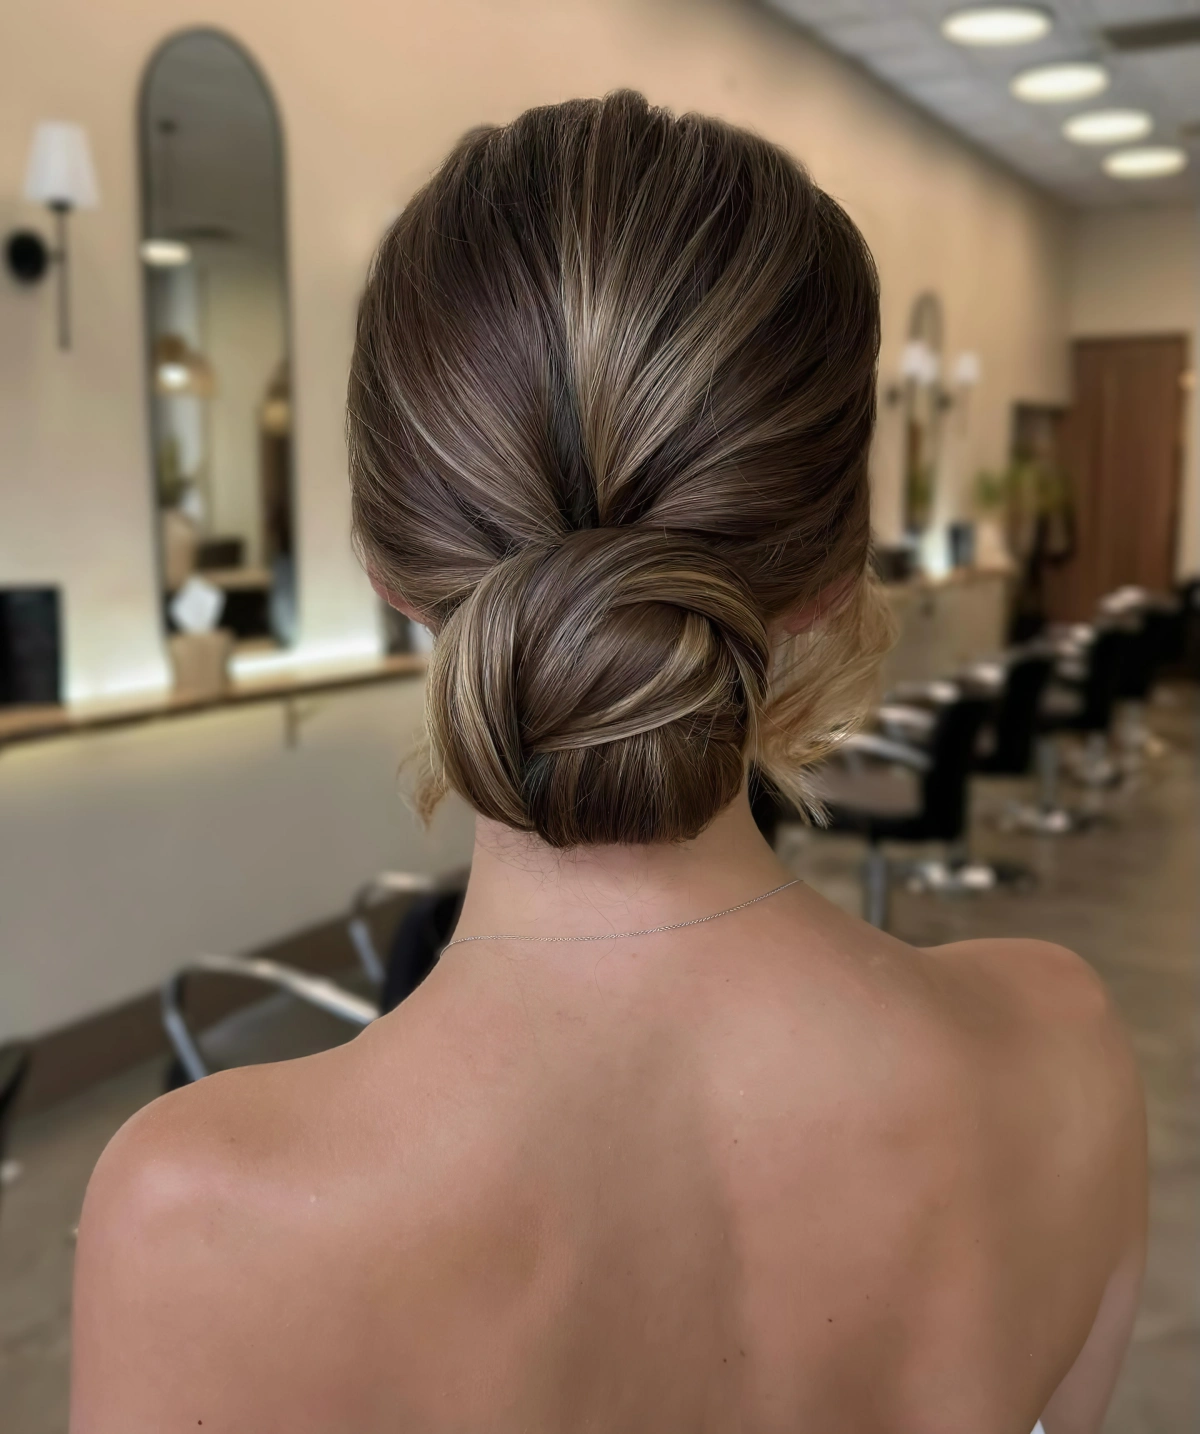 coiffure mariage chignon simple balayage naturel cheveux chatain fonce